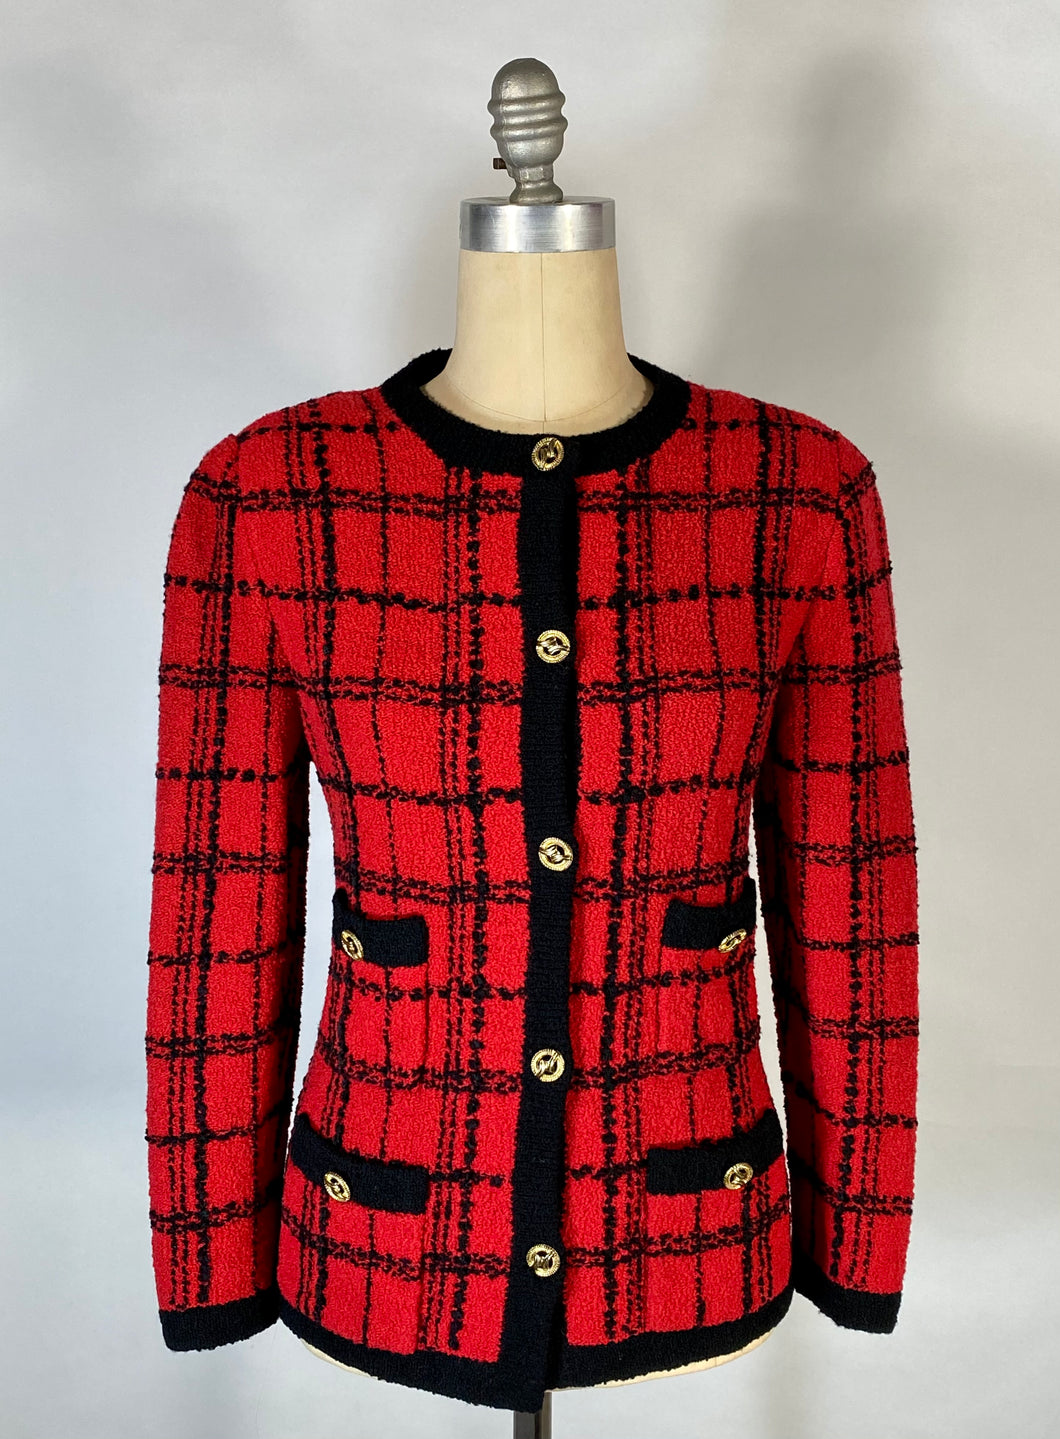 1980’s red and black windowpane check knit jacket with gold buttons